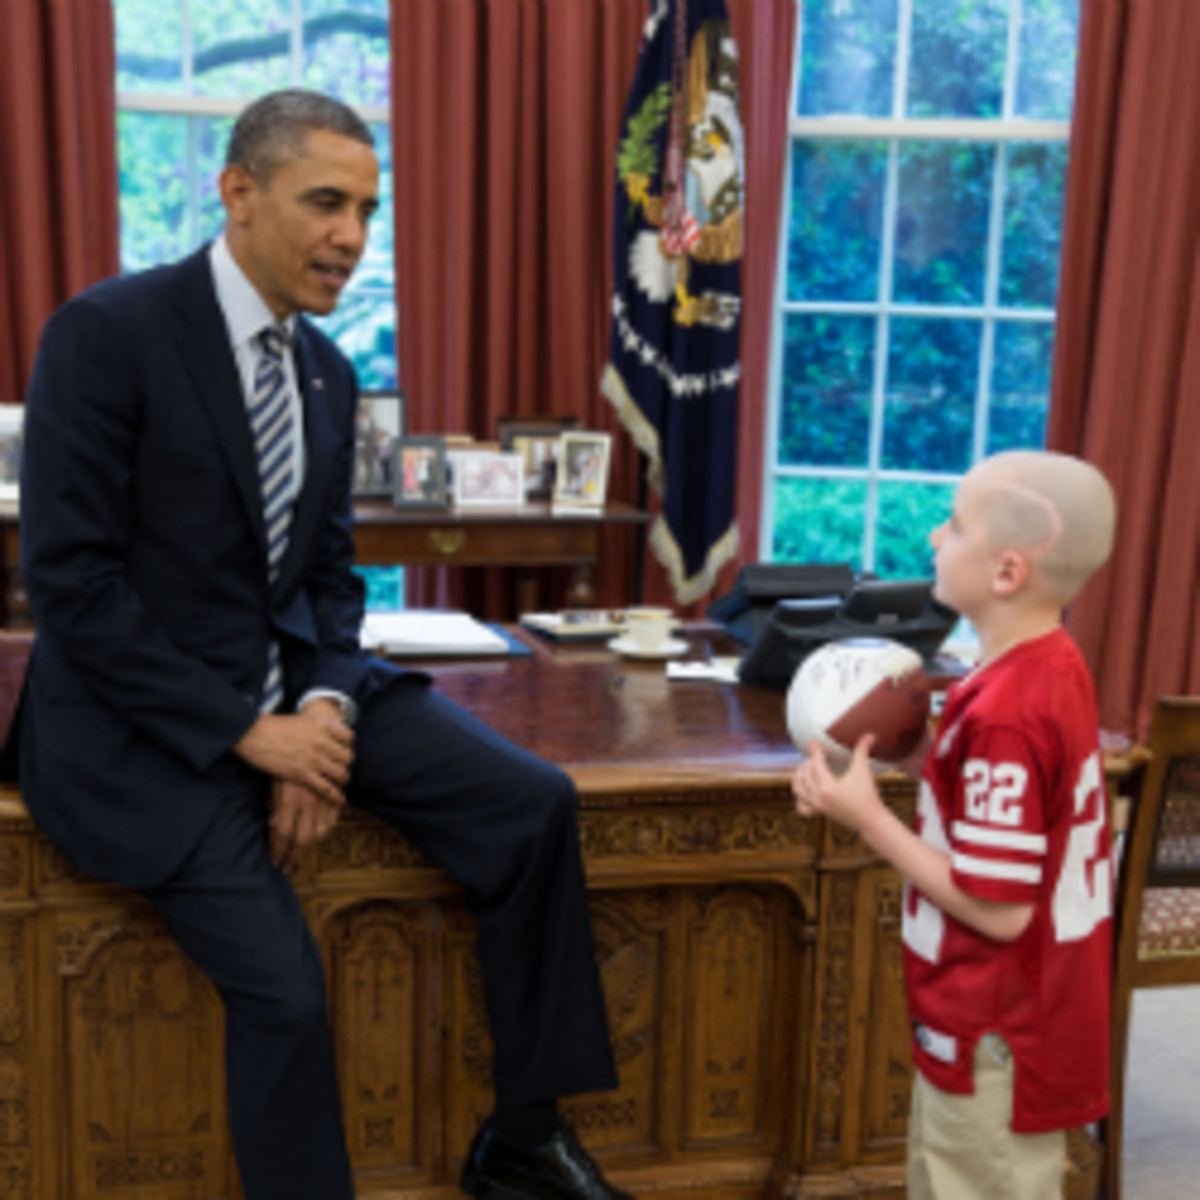 President Barack Obama met Monday with Nebraska fan and cancer patient Jack Hoffman in the White House. (Pete Souza/White House photo)